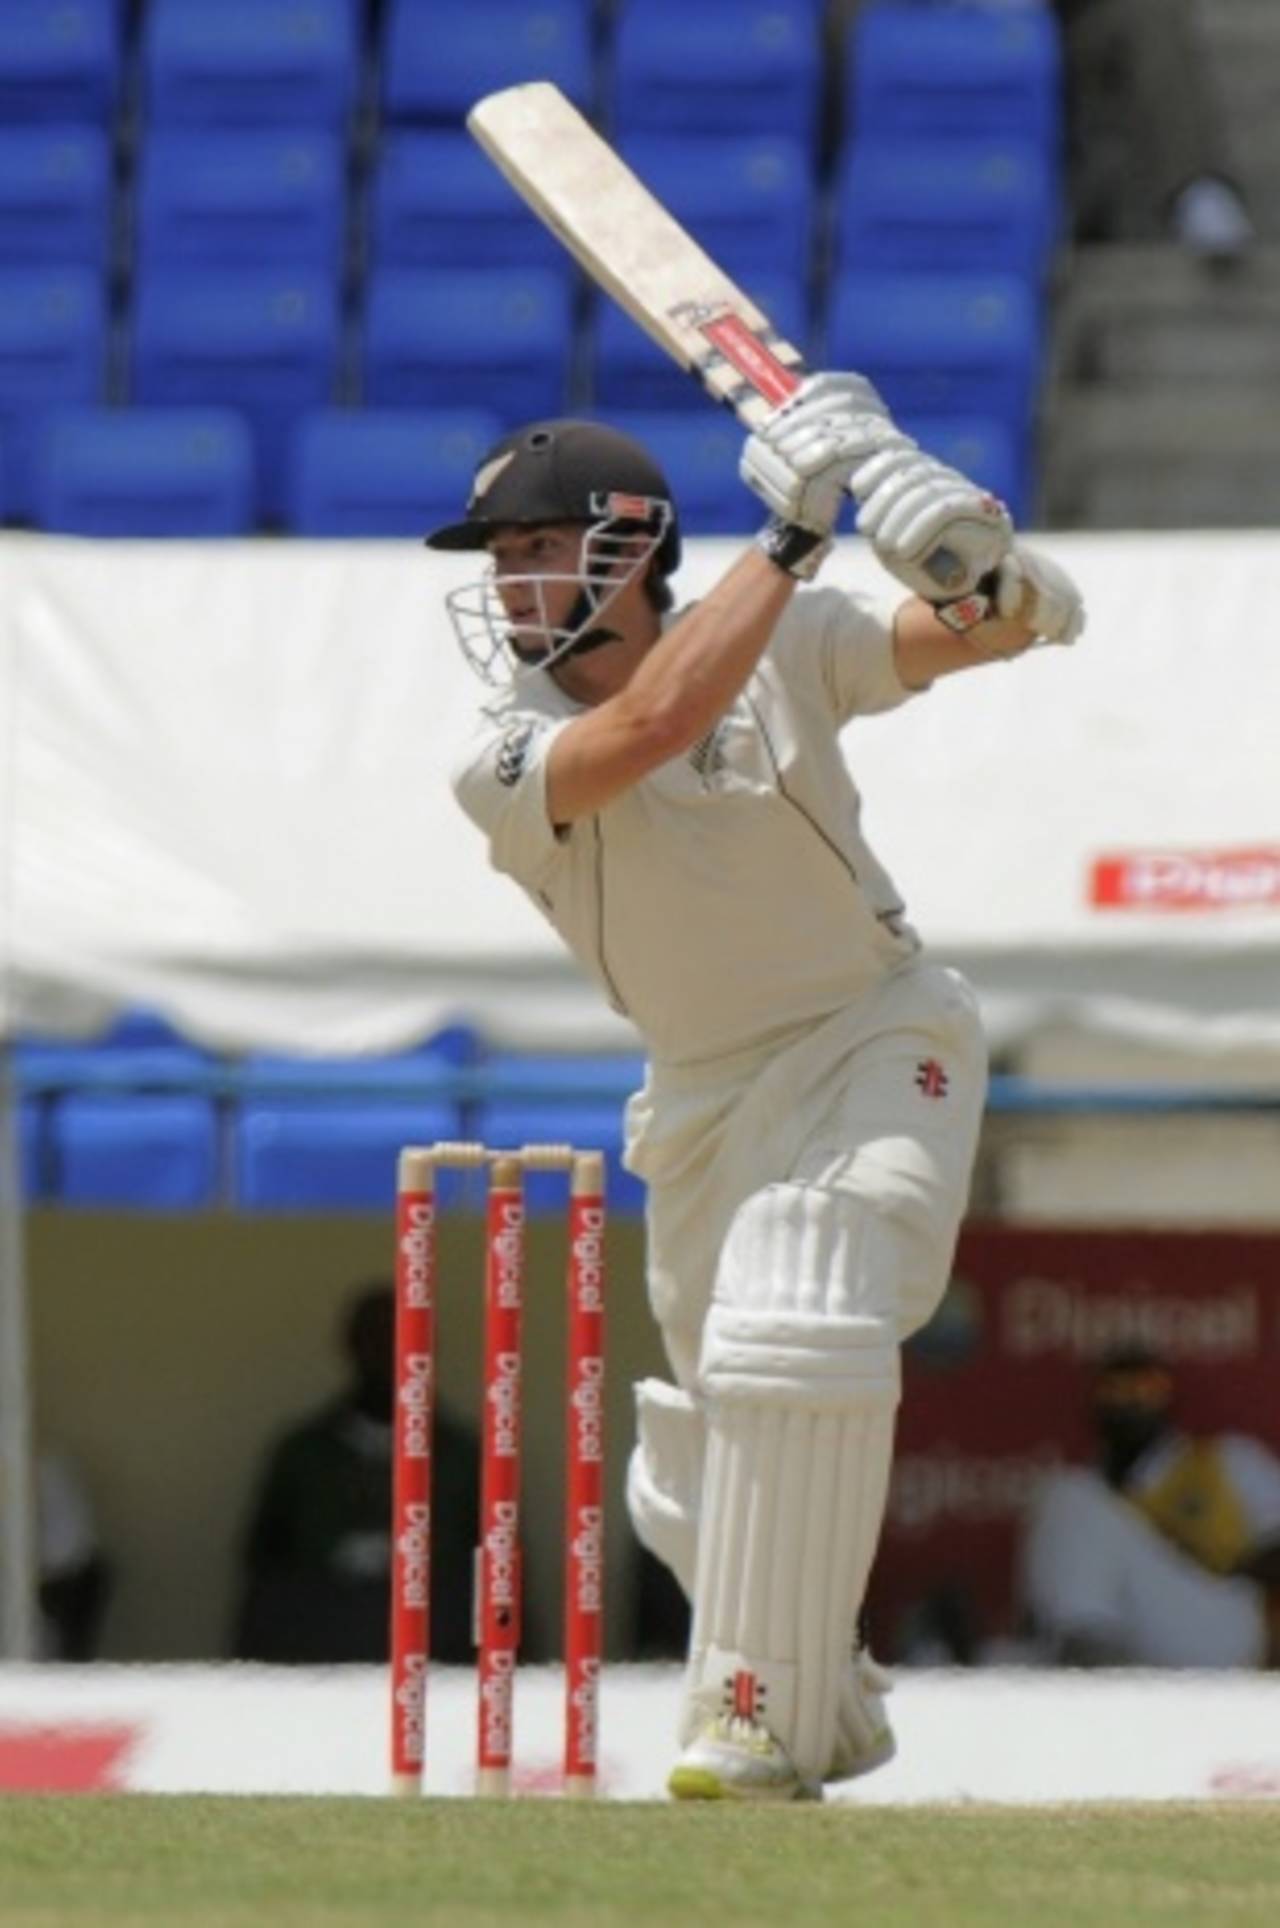 Kane Williamson: New Zealand's fortunes seem to ride on his shoulders right now&nbsp;&nbsp;&bull;&nbsp;&nbsp;DigicelCricket.com/Brooks LaTouche Photography